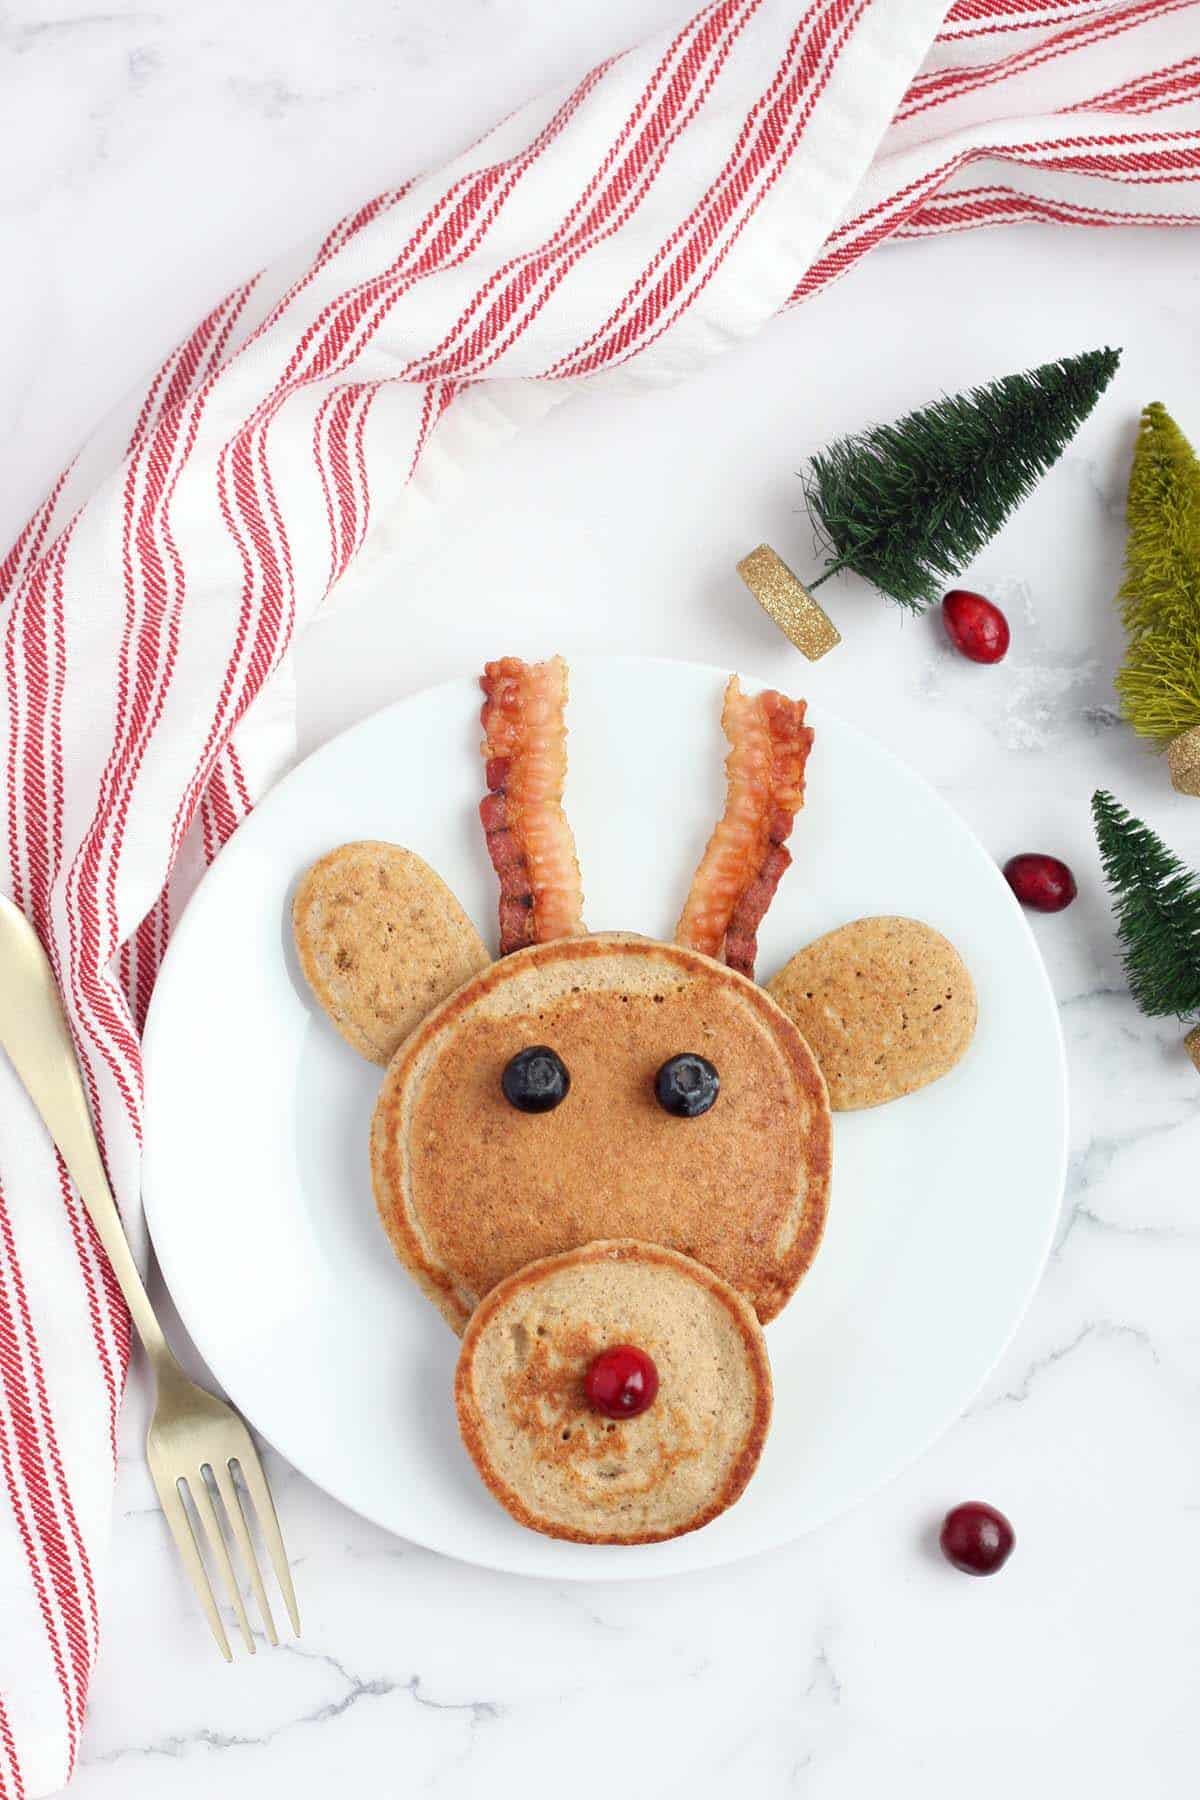 pancakes assembled to look like a reindeer with bacon for antlers